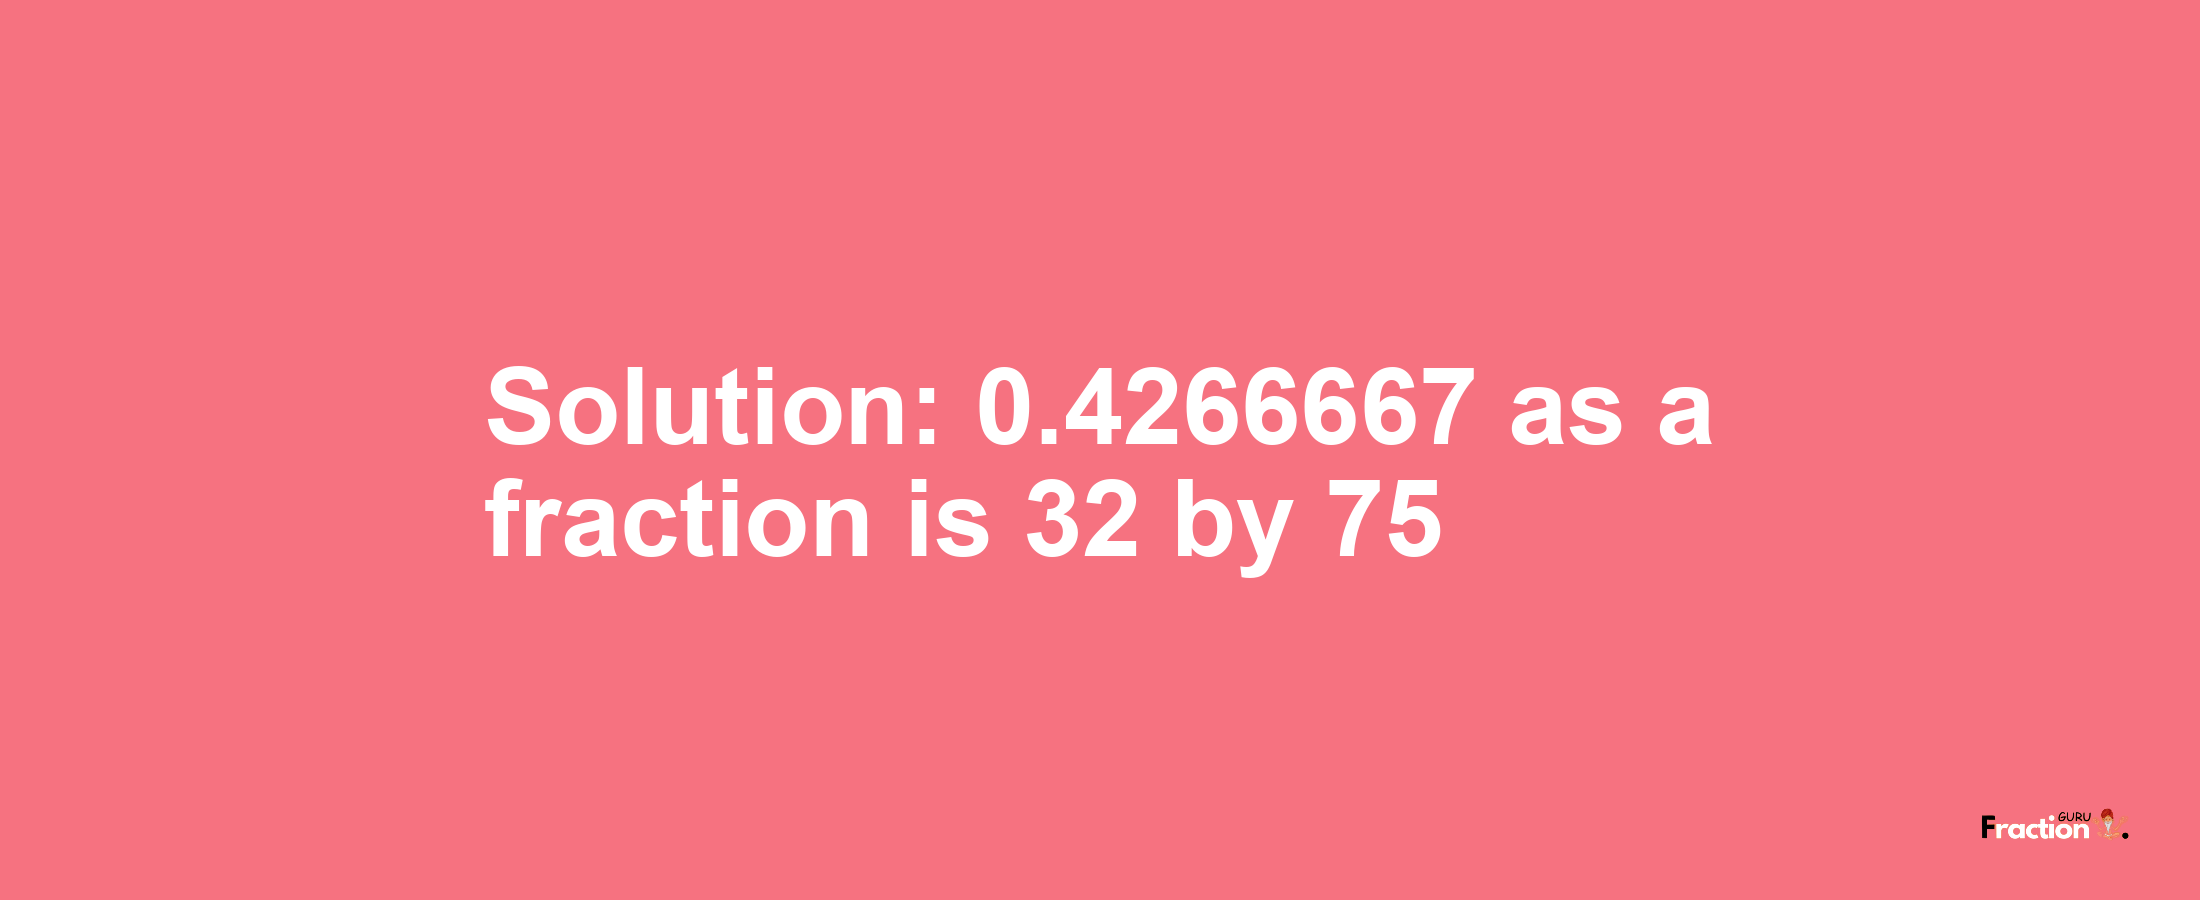 Solution:0.4266667 as a fraction is 32/75